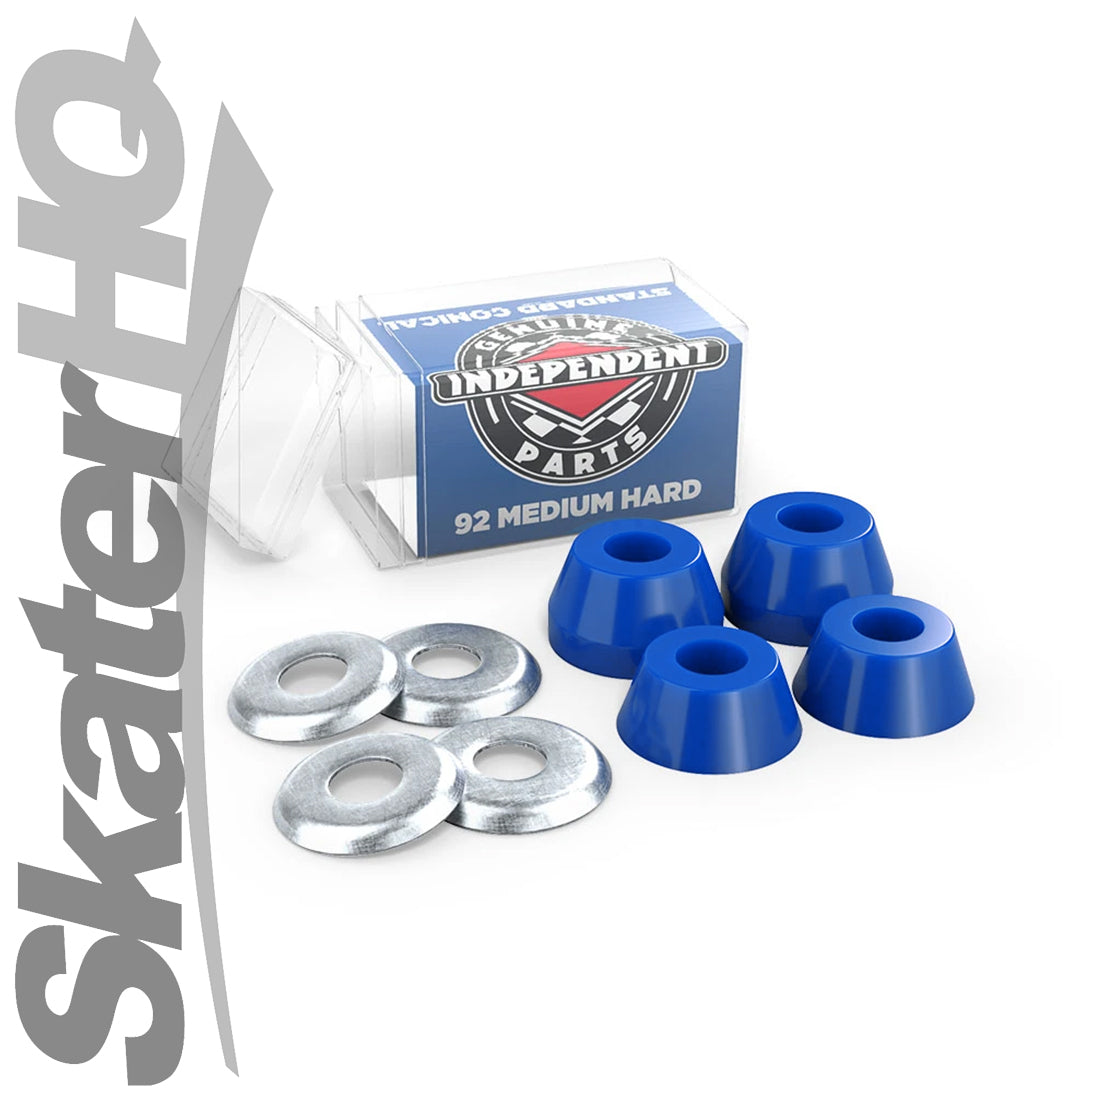 Independent STD/Conical 92a Mid-Hard Cushions - Blue Skateboard Hardware and Parts